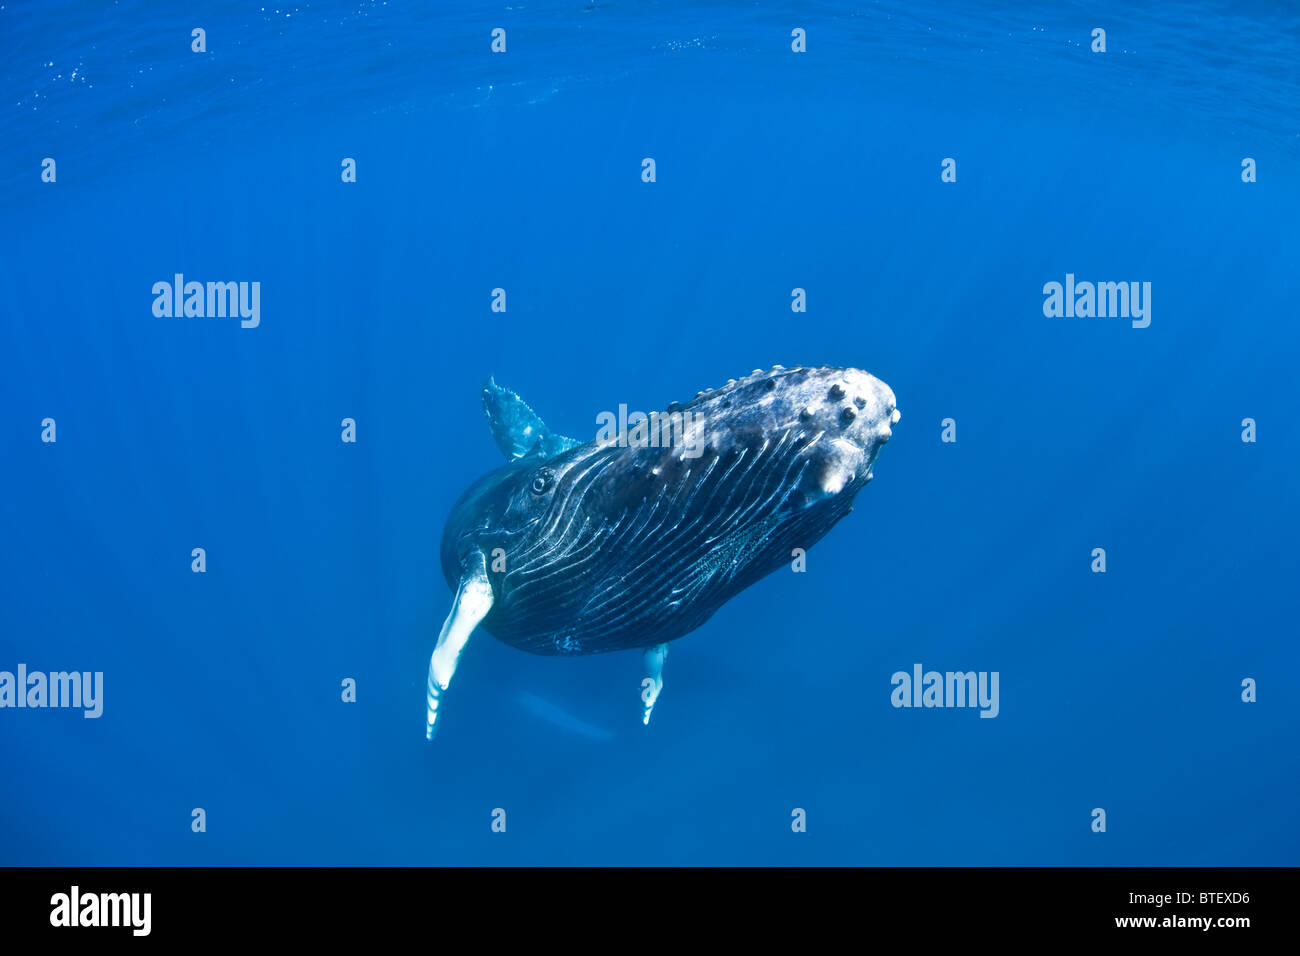 A Humpback whale calf, Megaptera novaeangliae, plays just under the surface while its mother rests below. Stock Photo